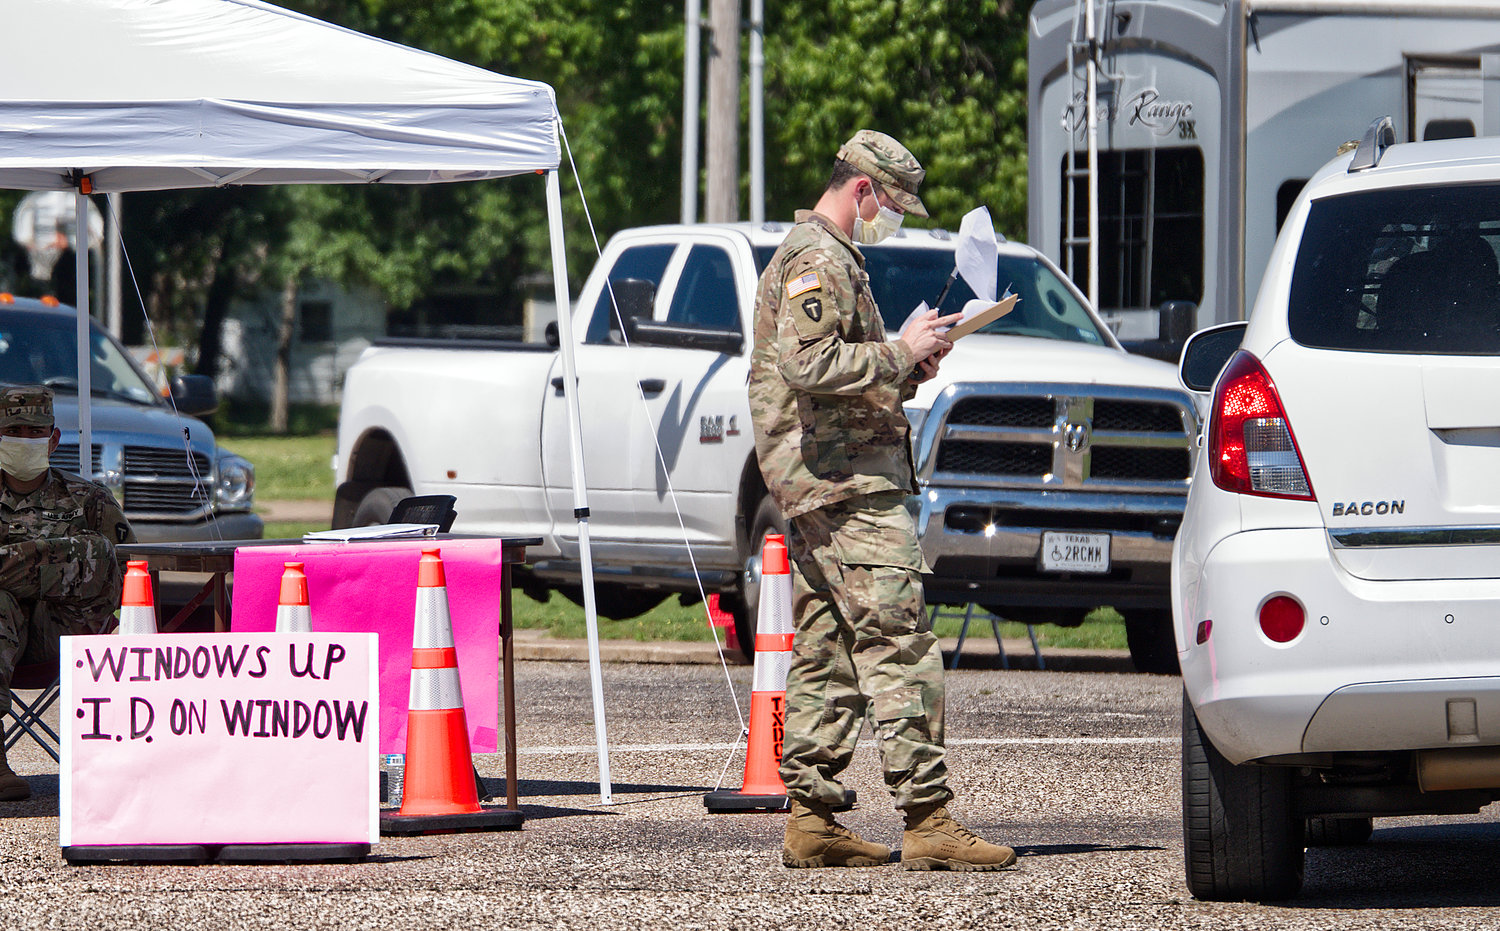 National Guard troops check in citizens for COVID-19 testing Friday at the Mineola Civic Center, where a mobile testing site was established by the Texas Dept. of State Health Services.